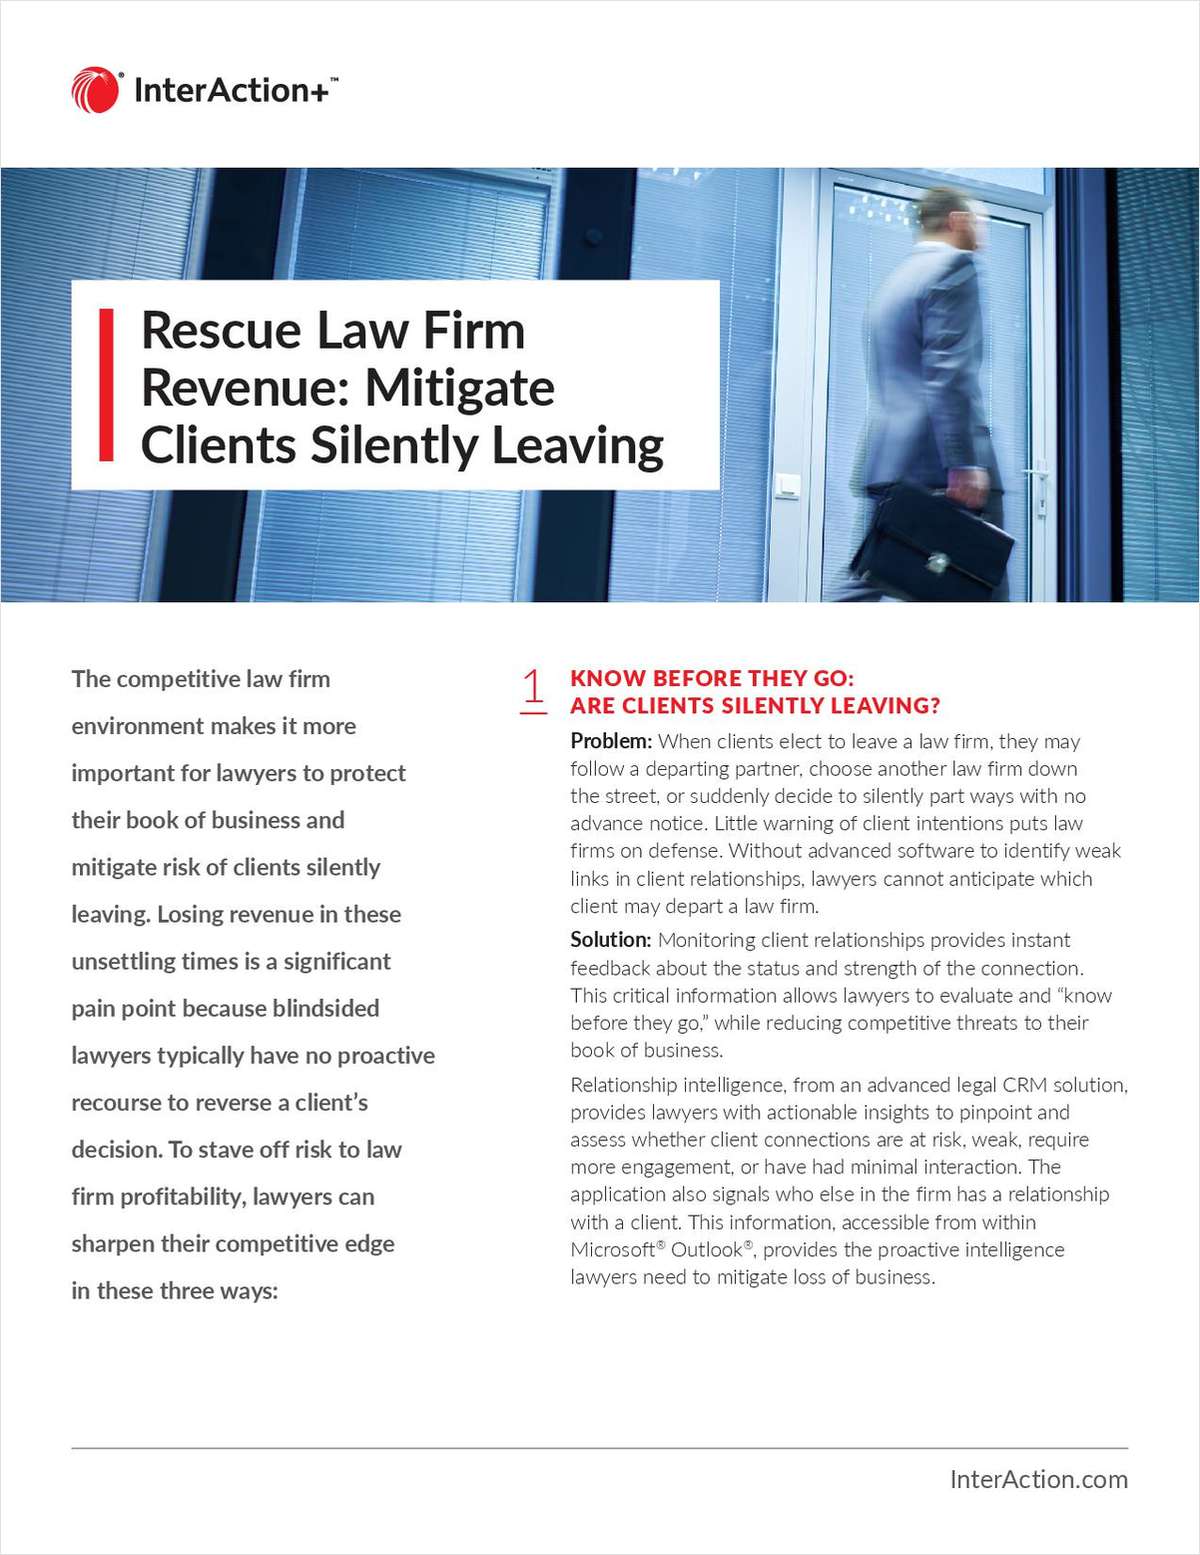 Losing clients can be especially damaging in today’s competitive law firm environment. This white paper outlines three ways you can sharpen your competitive edge as a lawyer to stave off the risk of clients leaving and create enduring relationships.